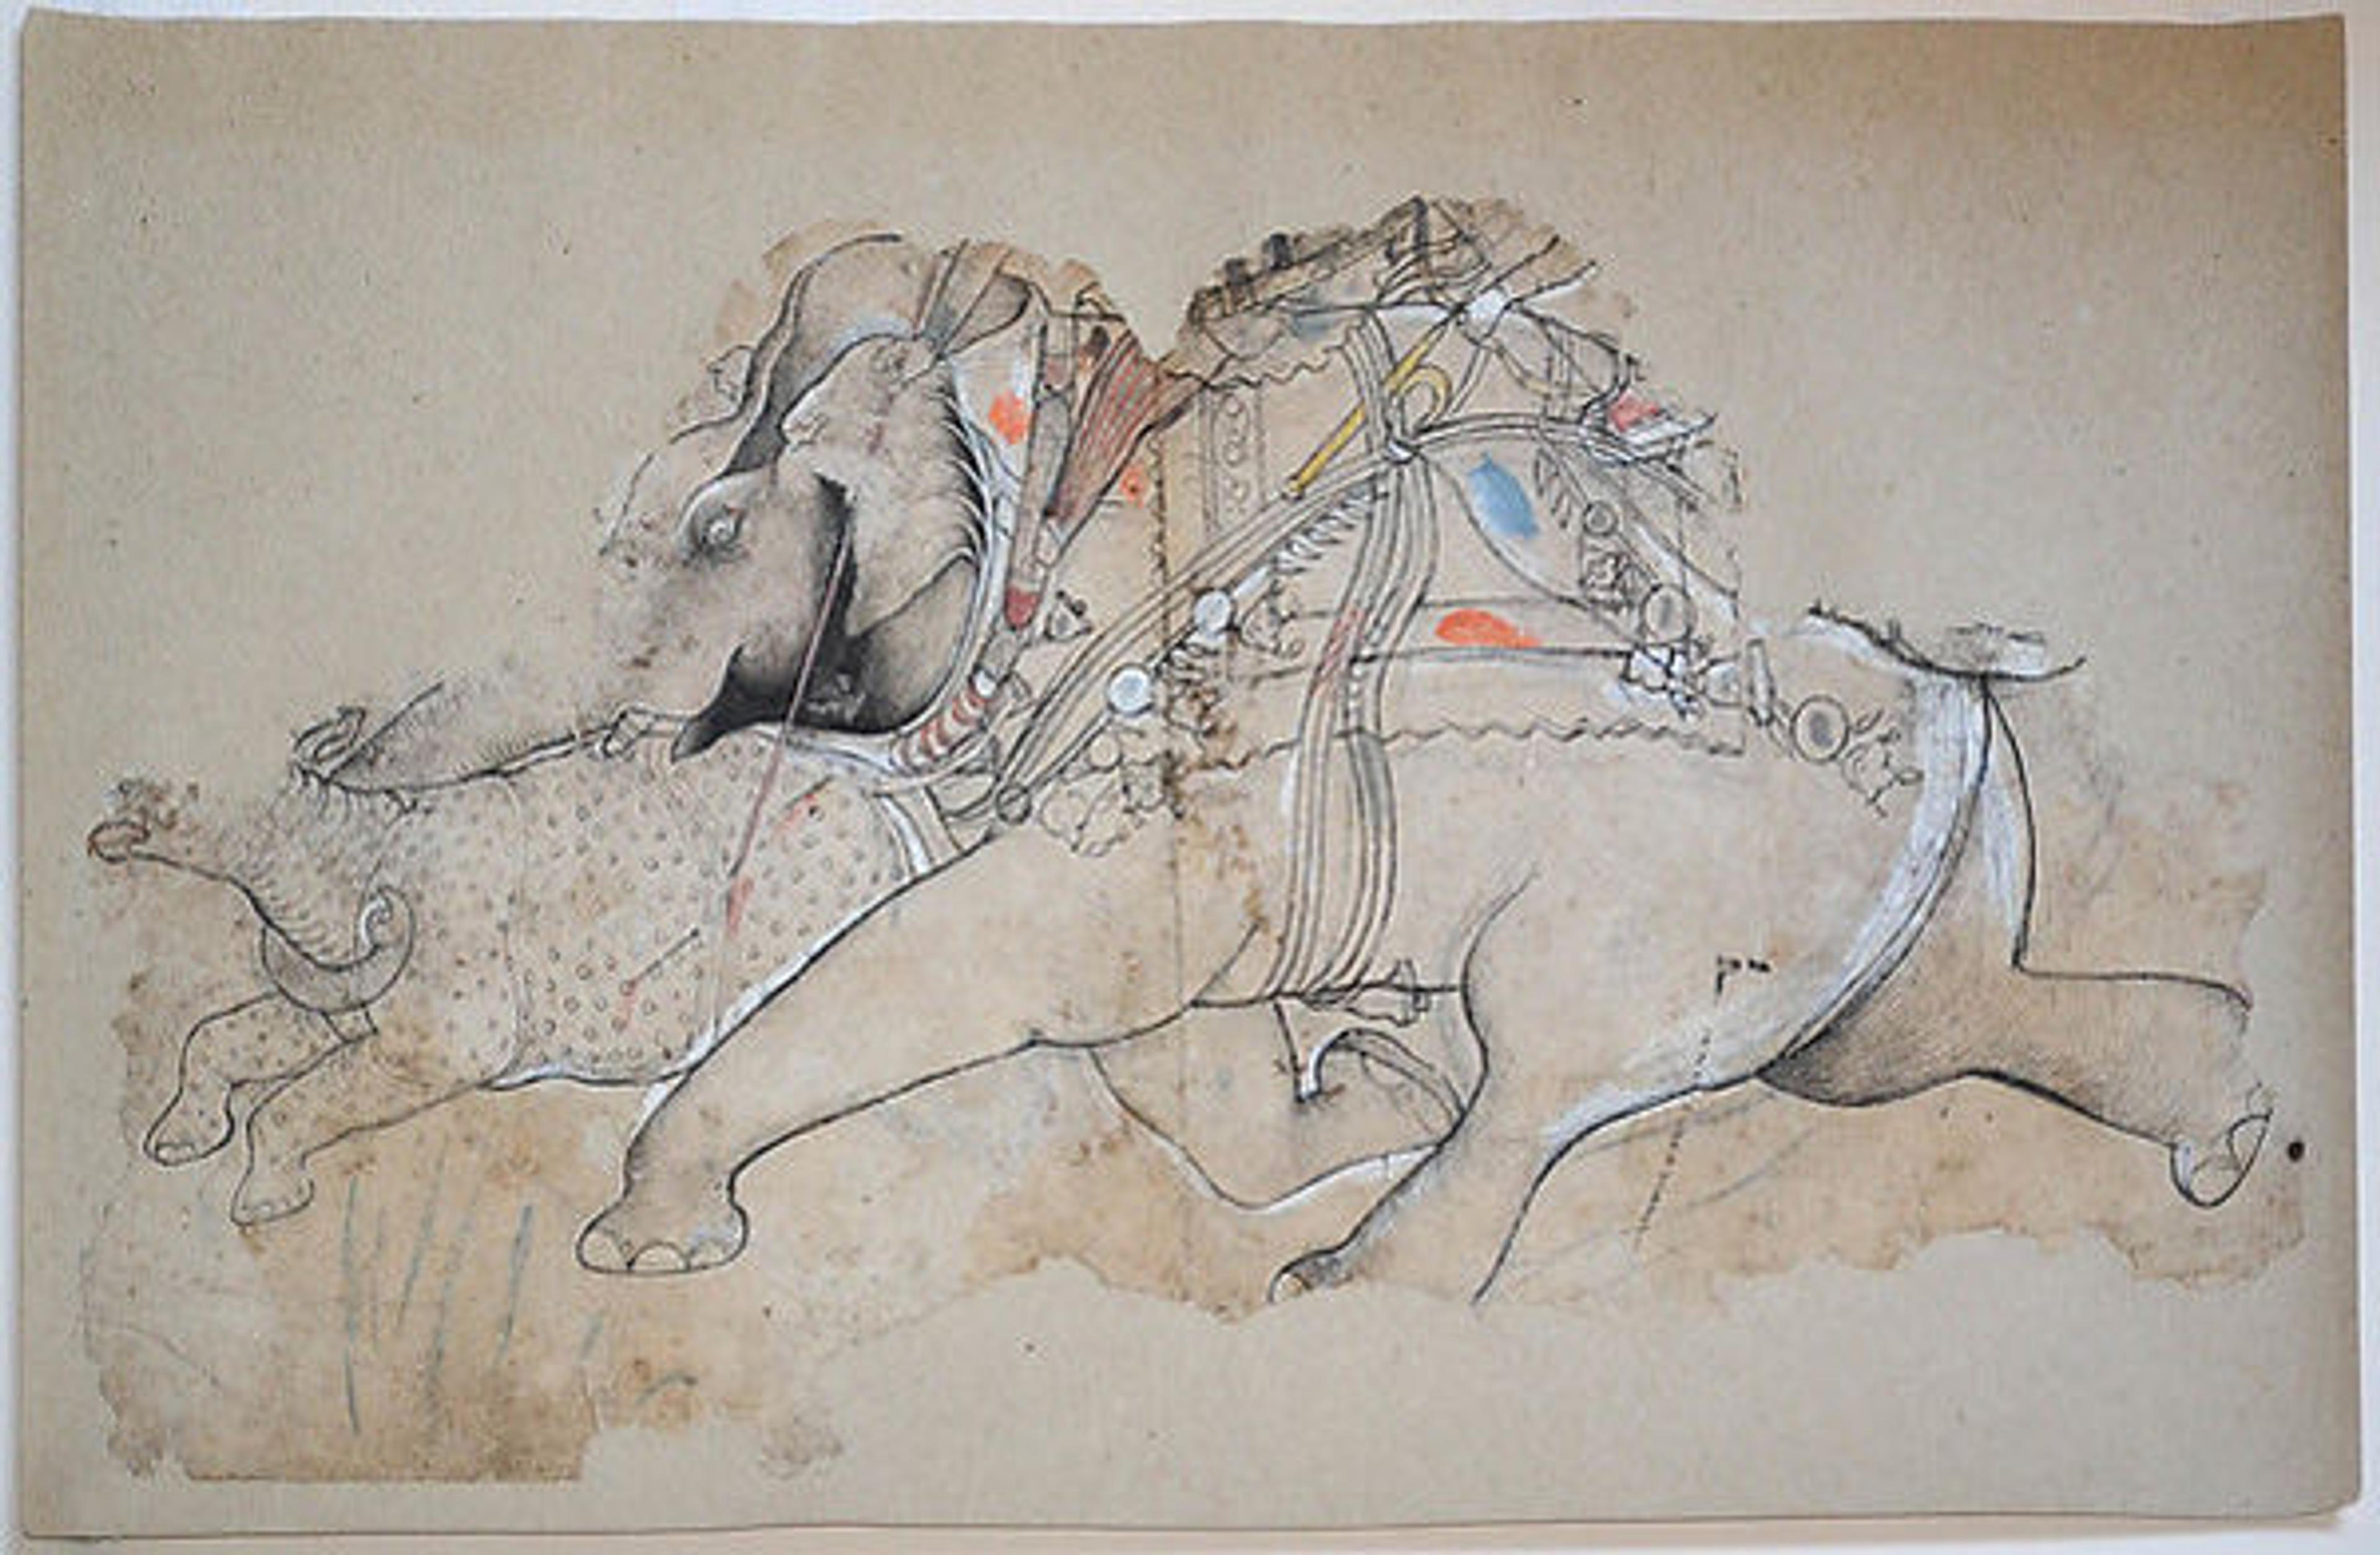 Attributed to The Kota Master (Indian, active early 18th century). Study for Rao Ram Singh I Hunting Rhinoceros on an Elephant, ca. 1690–1700. Western India, Rajasthan, Kota. Ink with touches of color over charcoal underdrawing on paper; 10 1/2 x 19 7/8 in. (26.7 x 50.5 cm). Lent by Terence McInerney